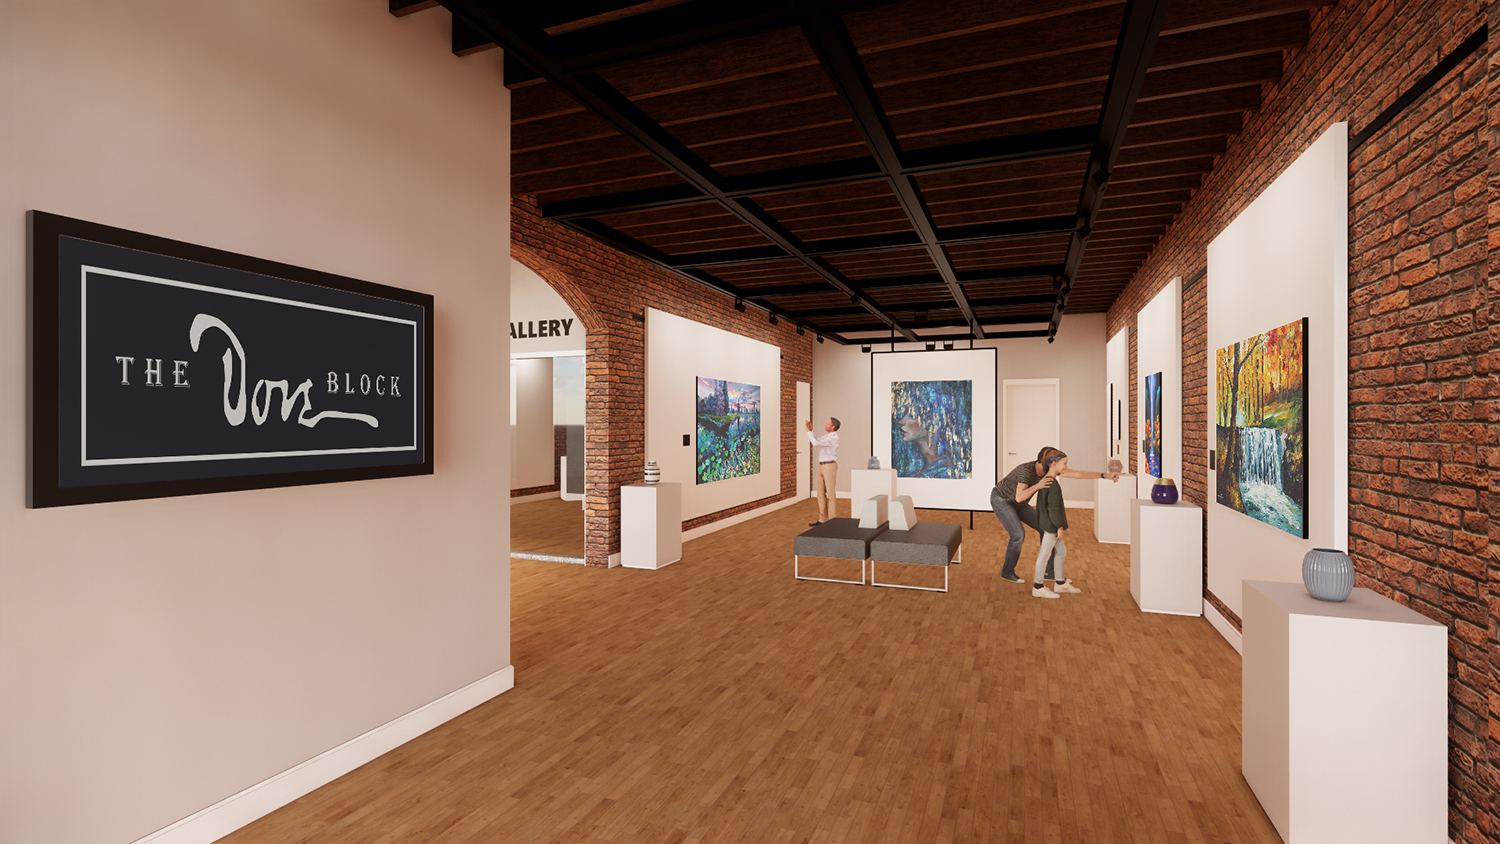 A rendering with people engaging with a gallery space.